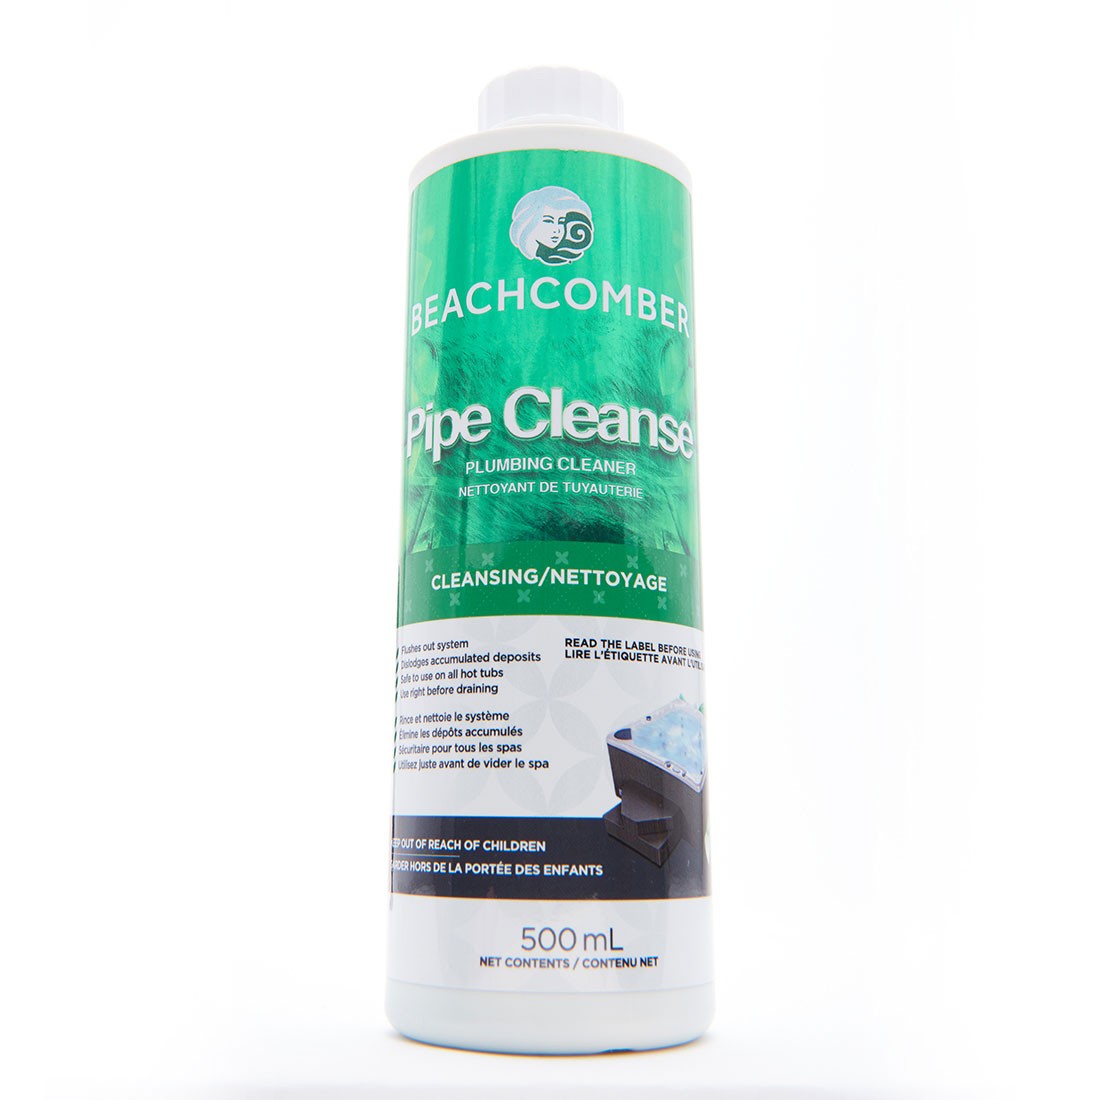 Pipe Cleanse (500ml) - Pipe Cleaner